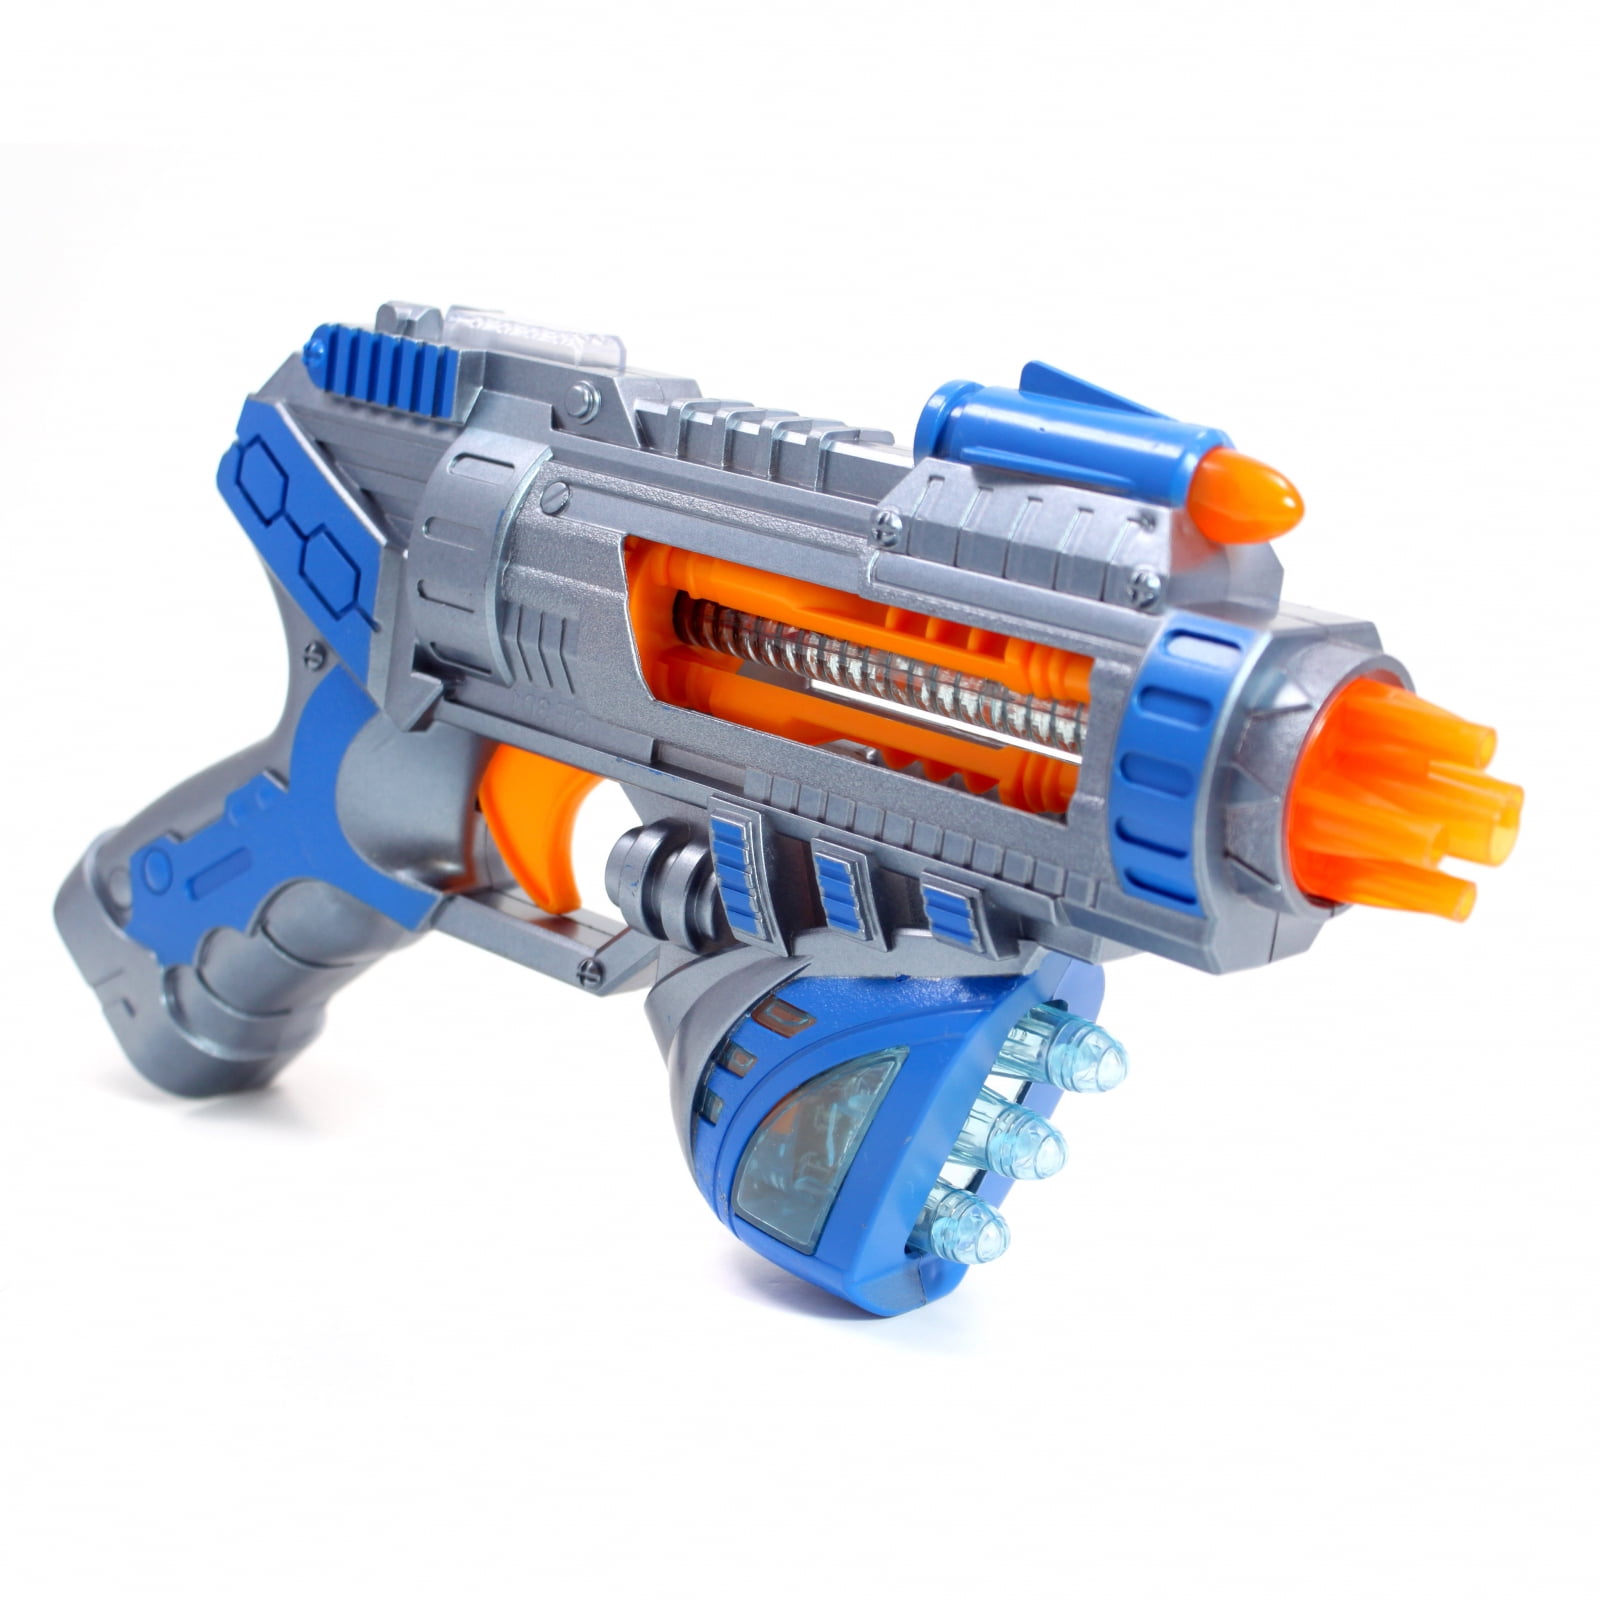 Adventure Force Shadow Pulse Blaster Toy Space Gun W/ Lights and Sounds for sale online 